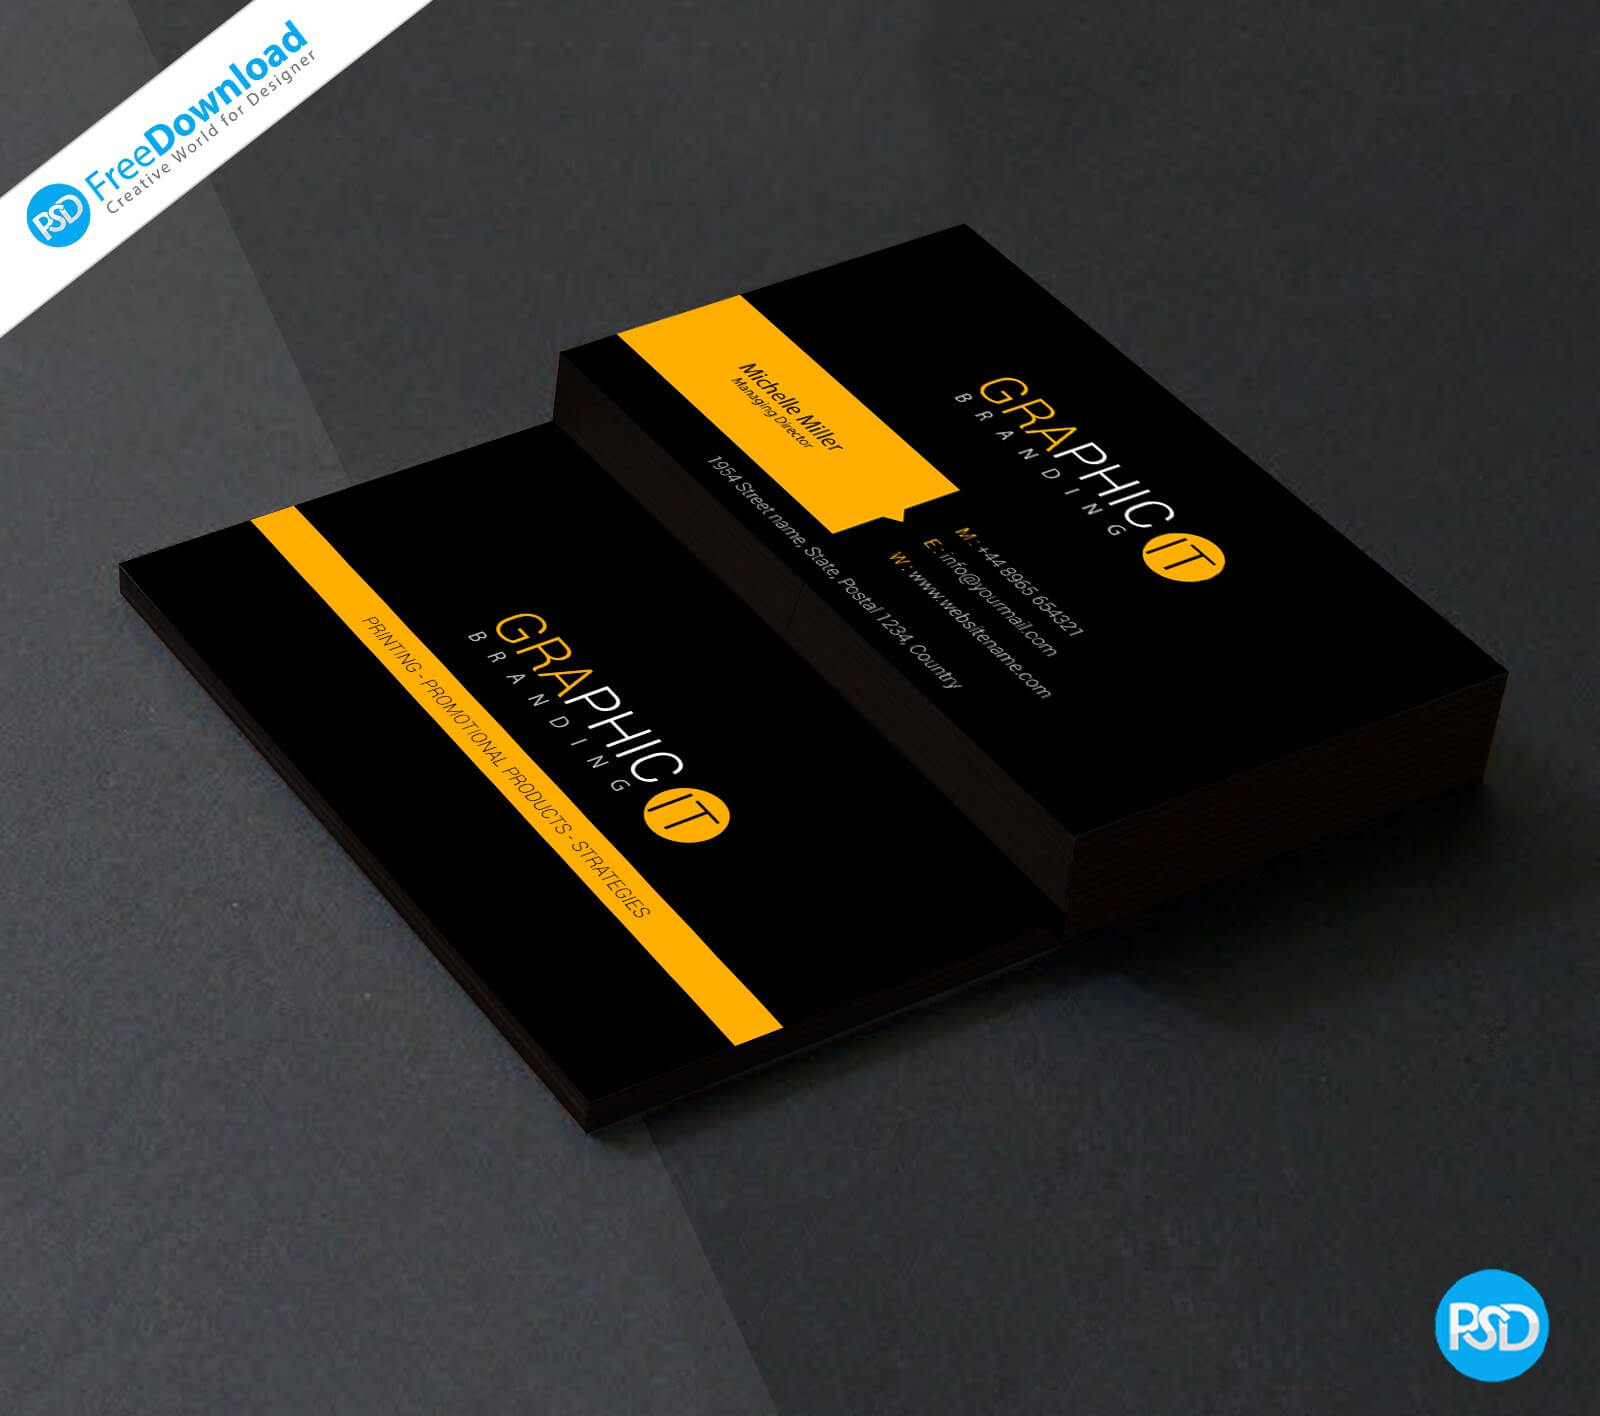 009 Template Ideas Photography Visiting Card Design Psd File With Regard To Visiting Card Psd Template Free Download